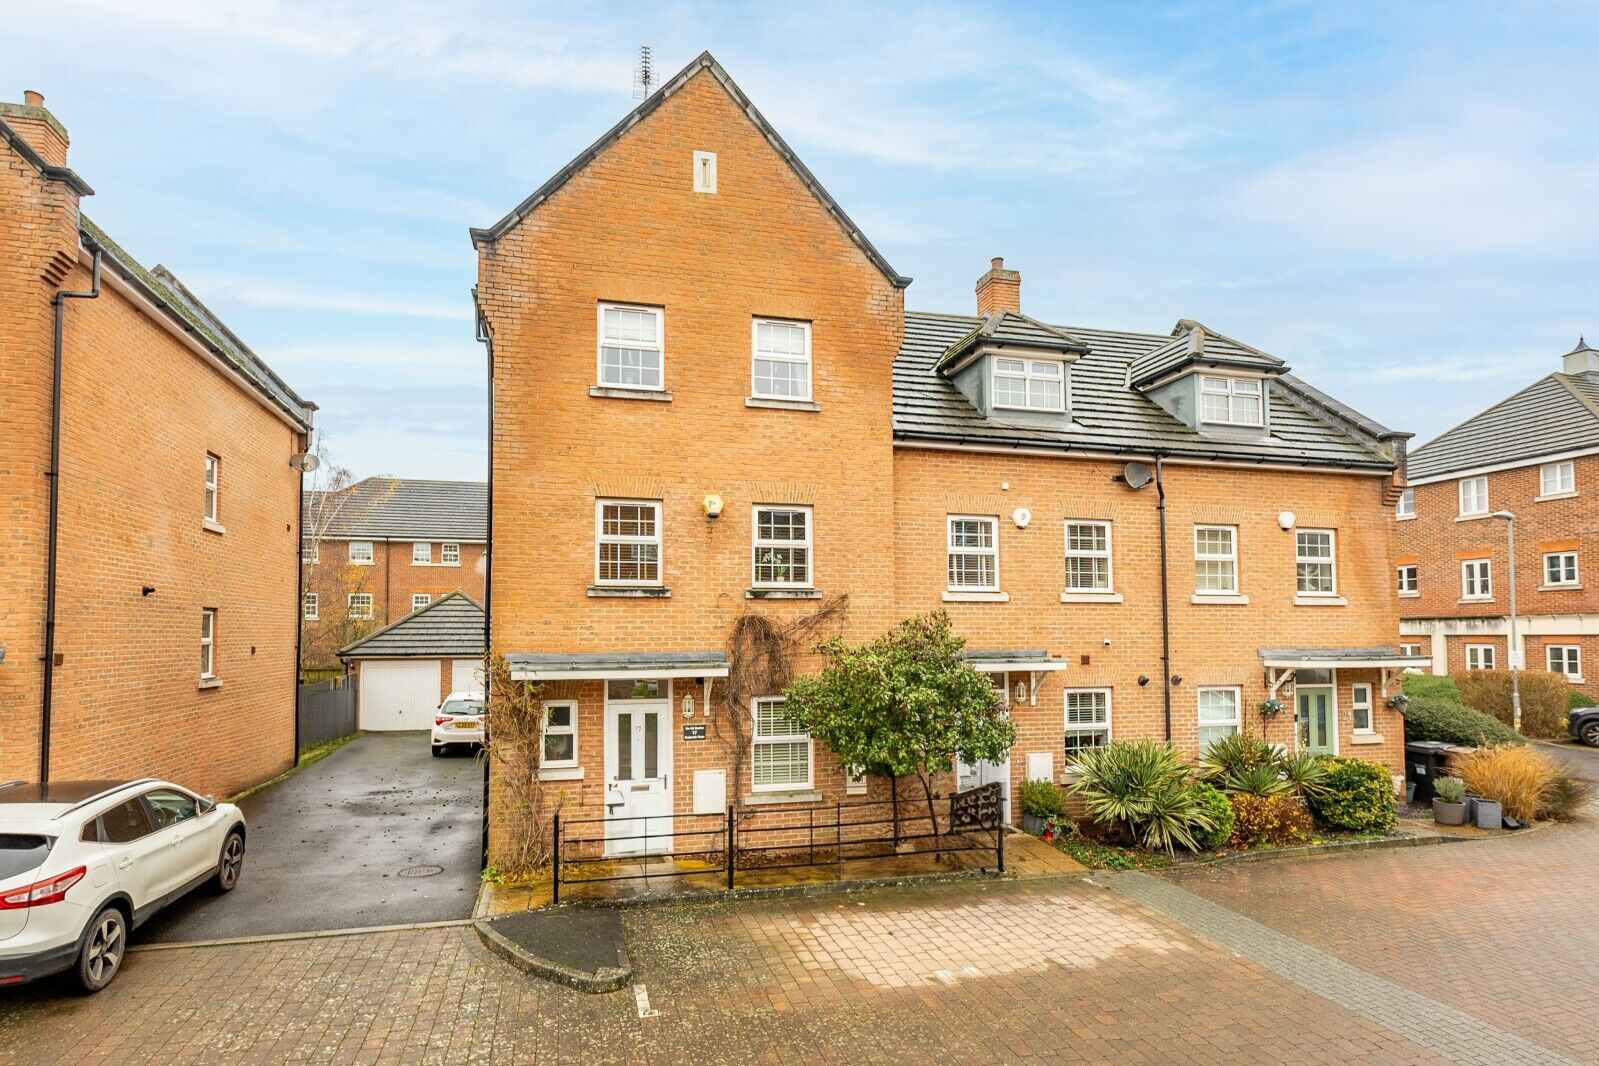 4 bedroom end terraced house for sale Curo Park, Frogmore, AL2, main image